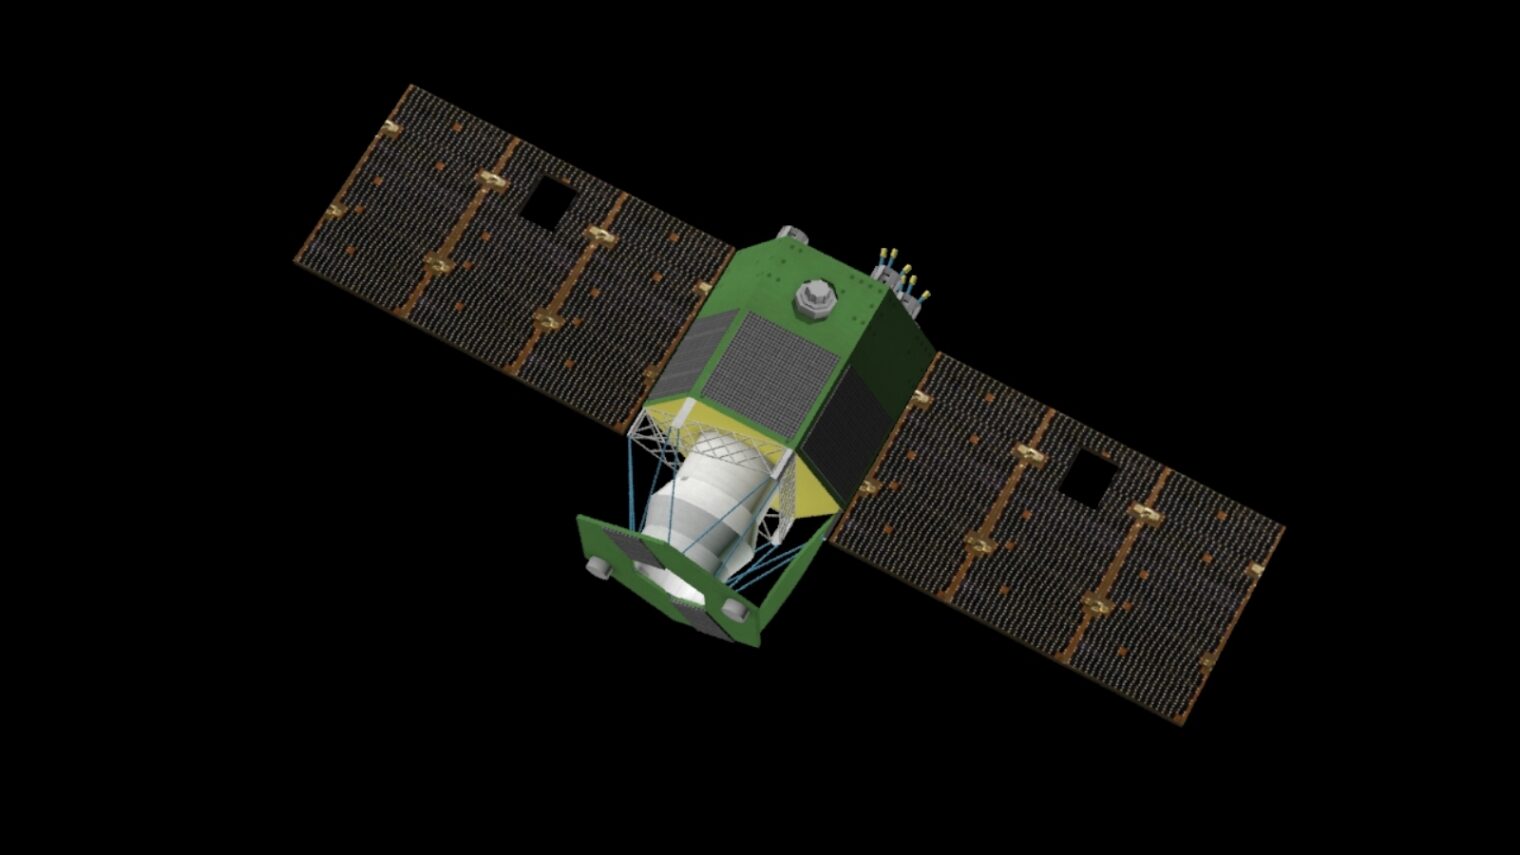 The Israeli-built Venus satellite will spend four and a half years imaging the Earth’s environment. Photo courtesy of Israel Ministry of Science and Technology